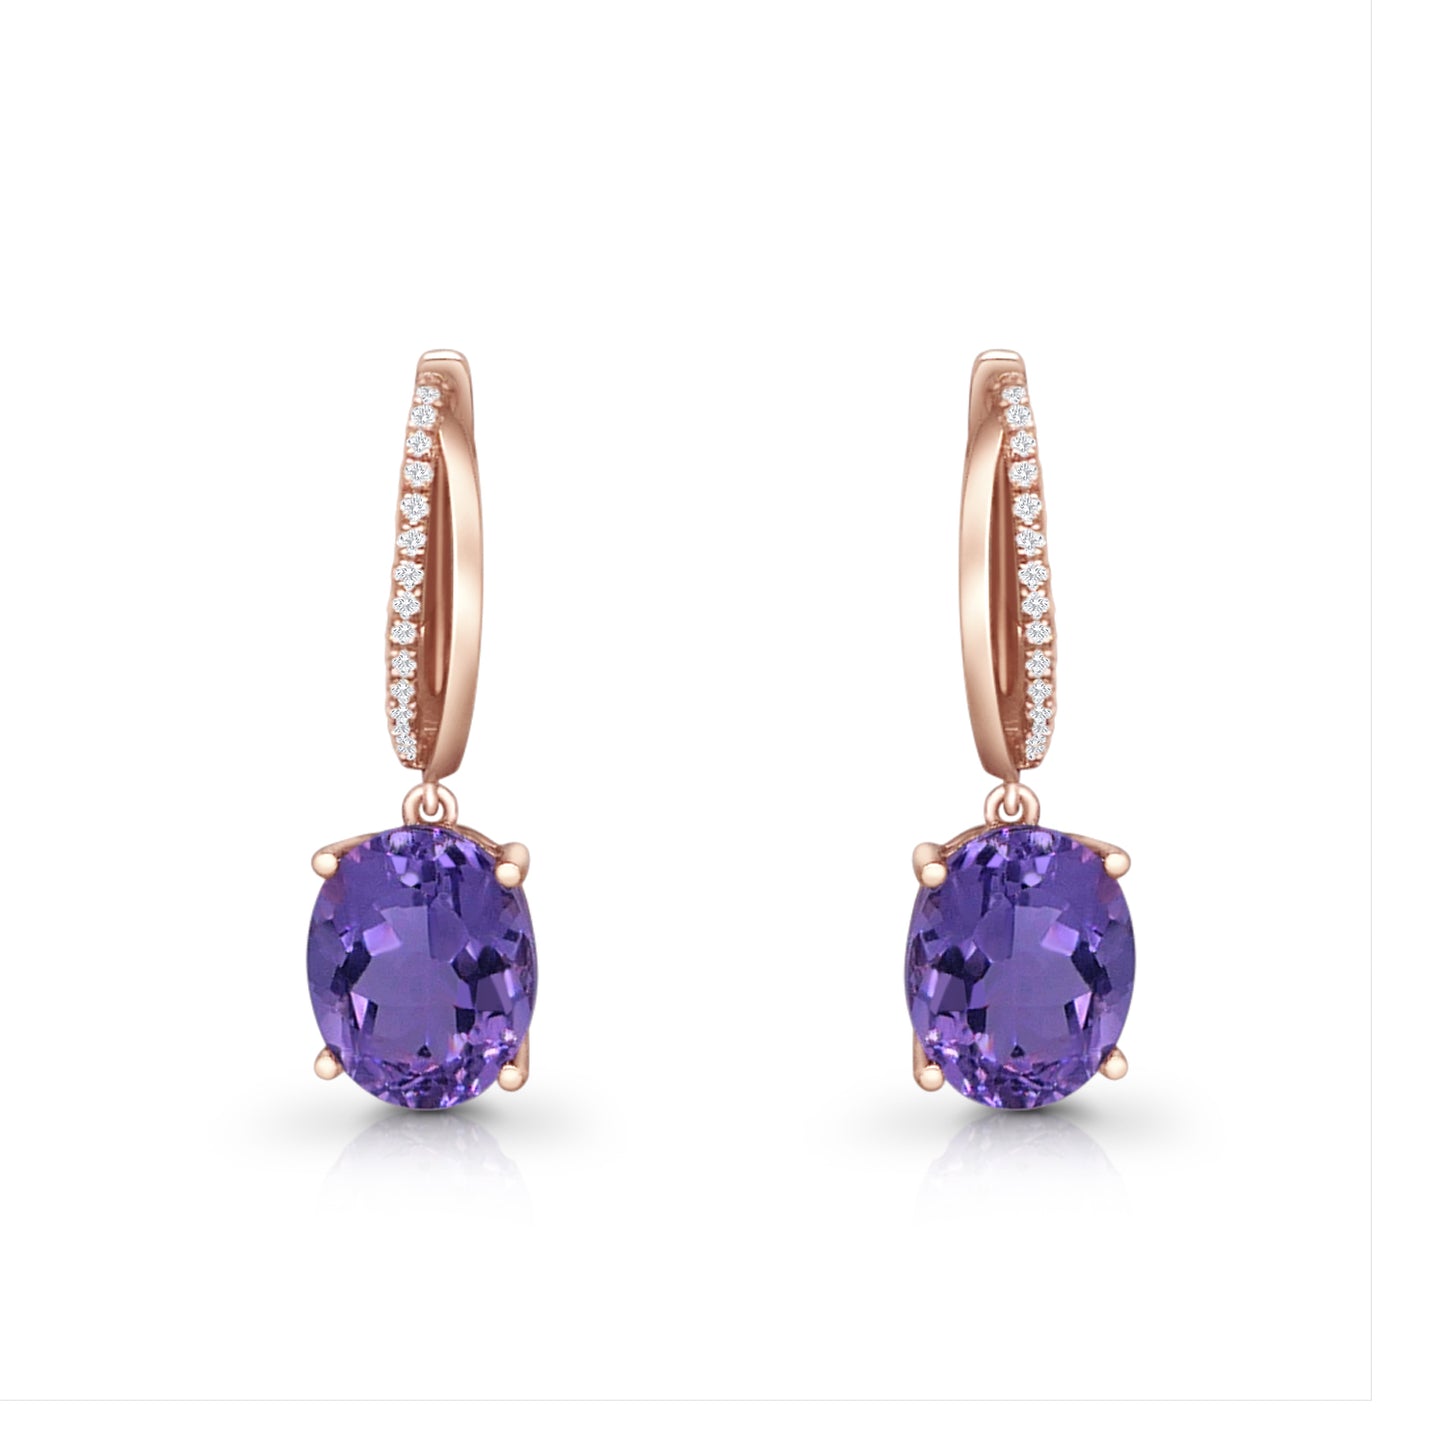 the Stone Sparkle Earrings - Rose Gold Plated Sterling Silver with Pink Amethyst